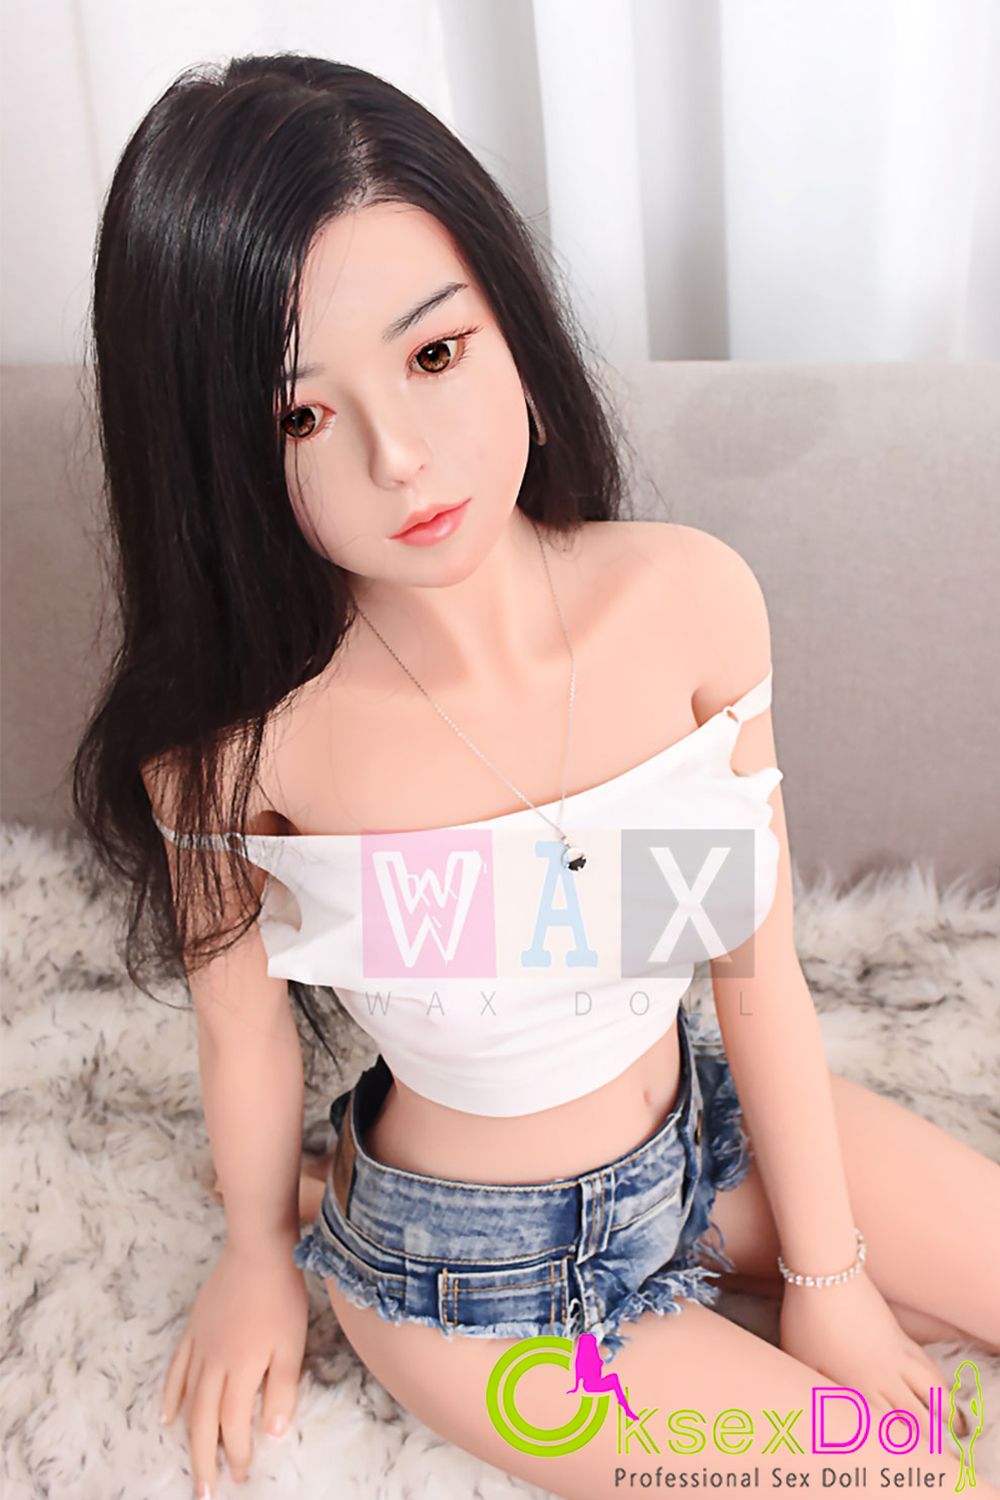 Young Sex Doll Pic of 『Aliyah』